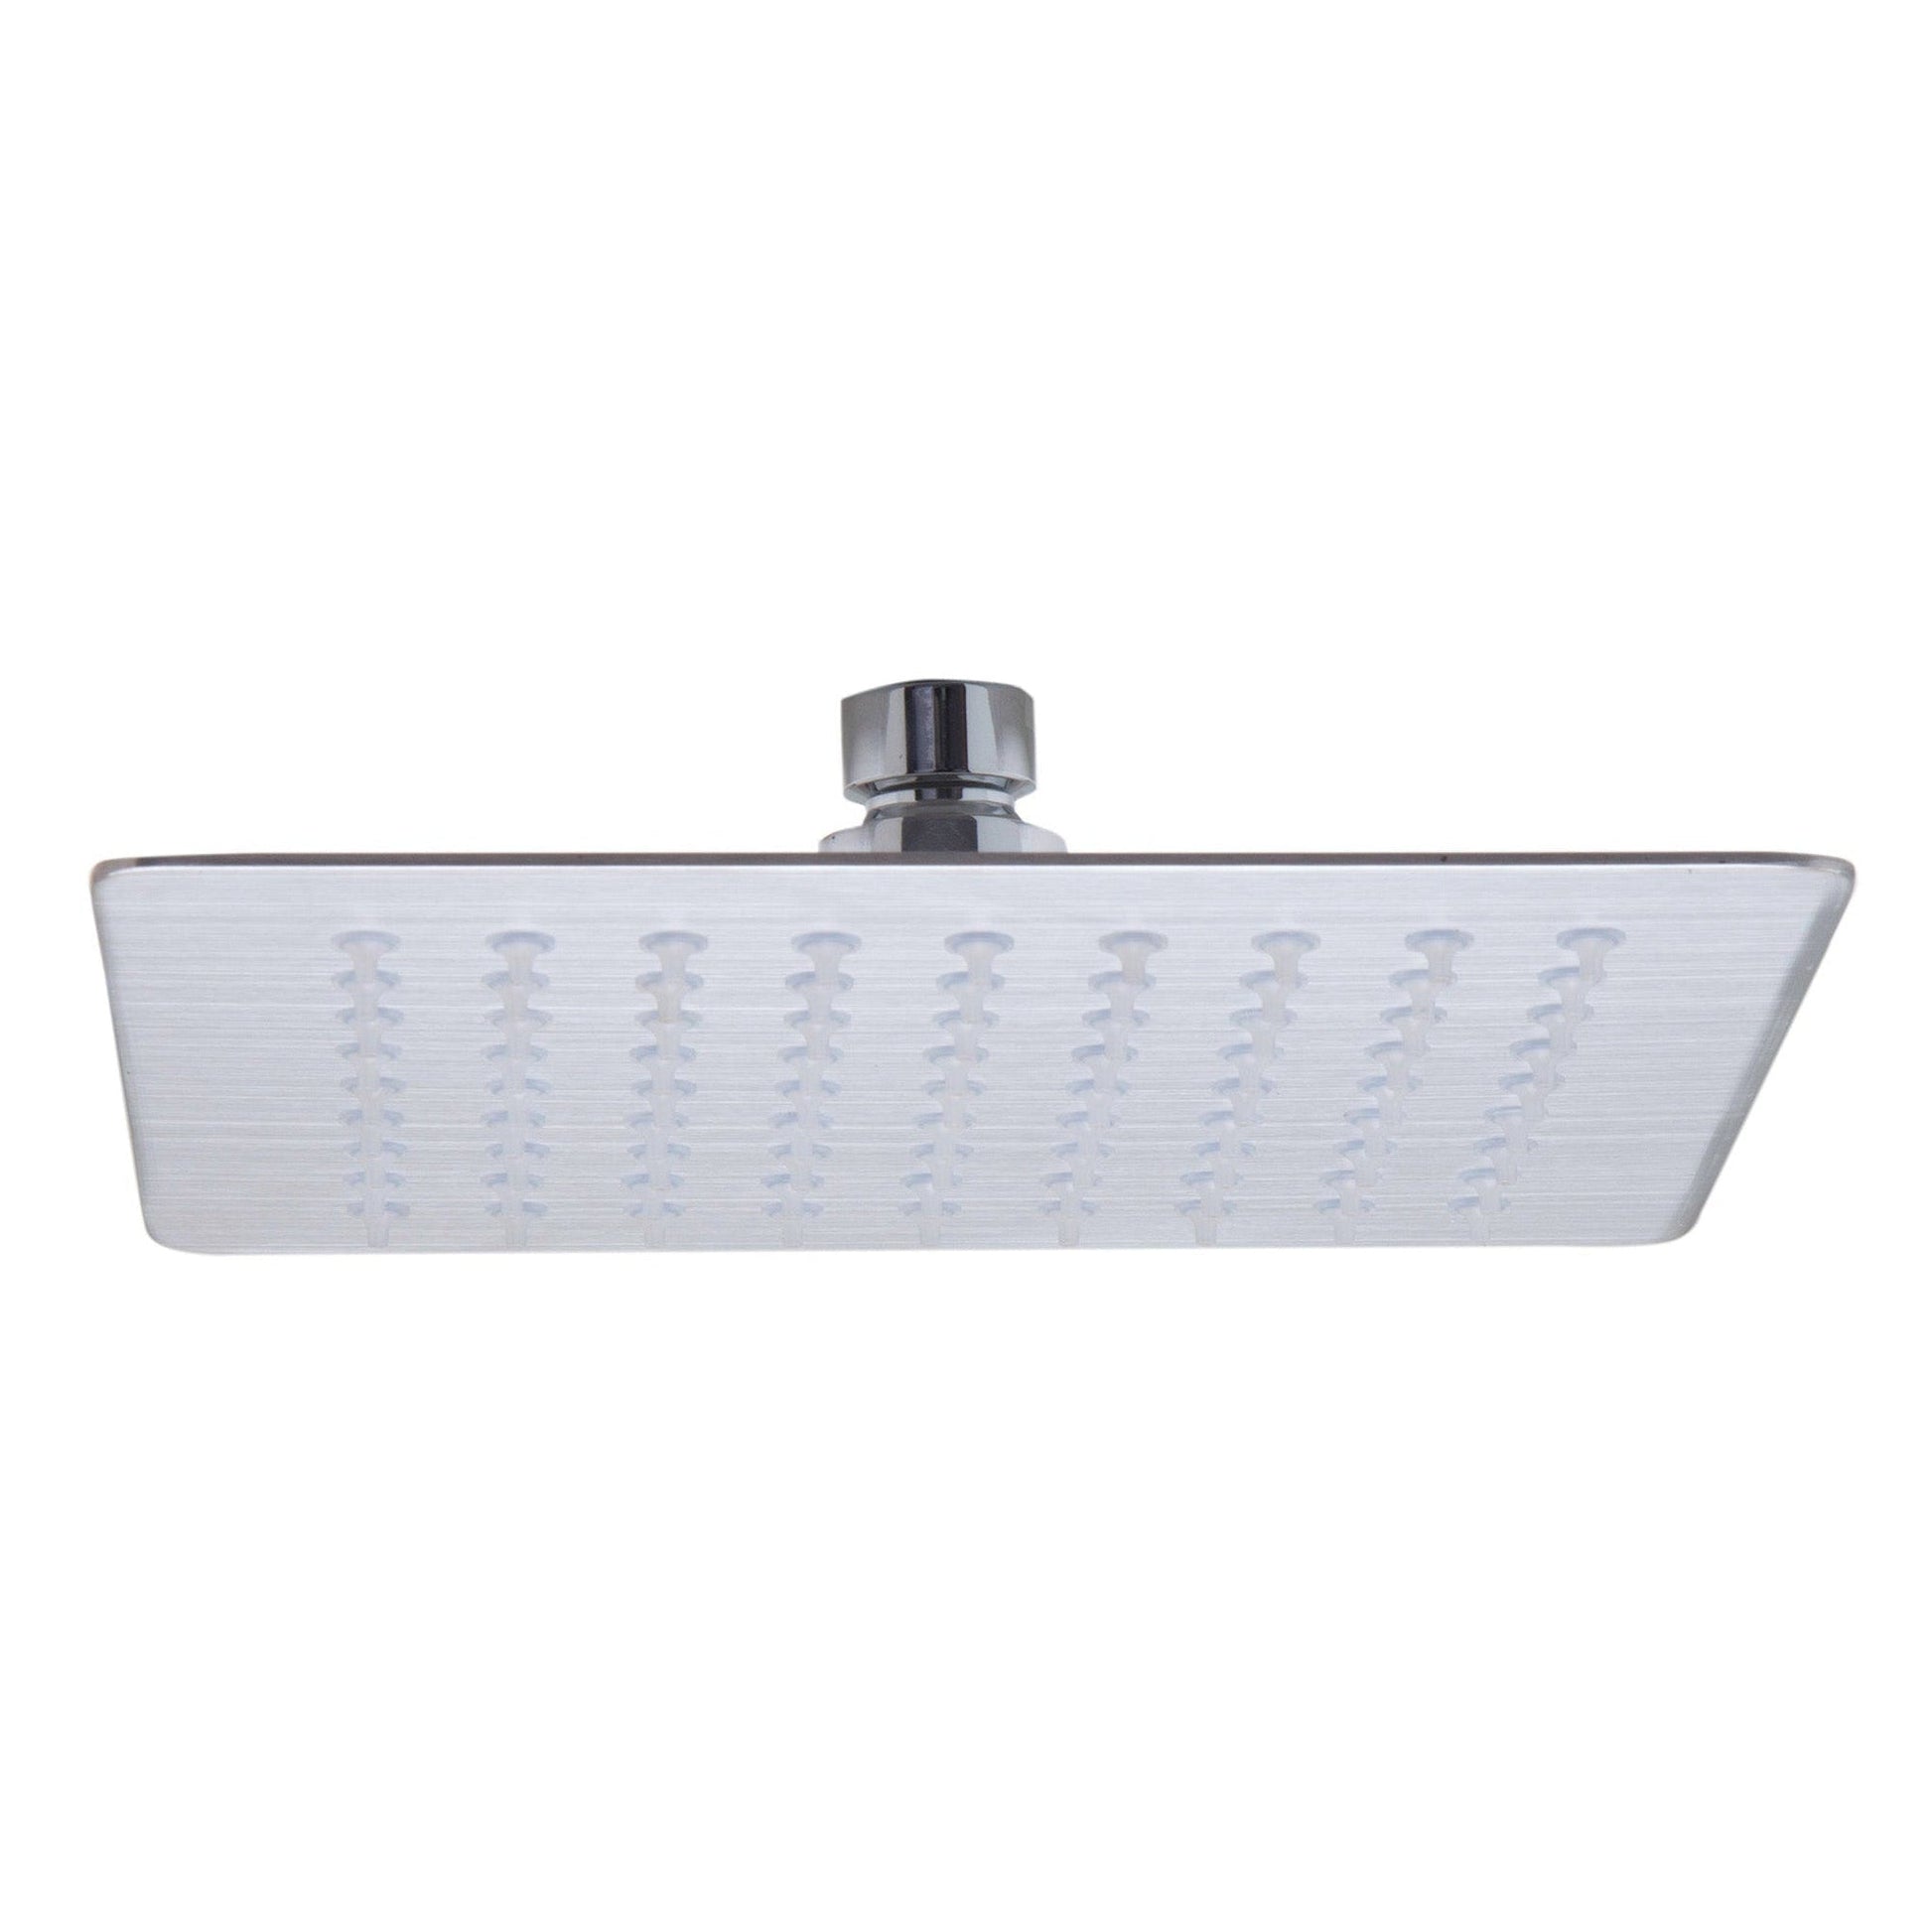 ALFI Brand RAIN8S-BSS 8" Square Solid Brushed Stainless Steel Wall or Ceiling Mounted Ultra Thin Rain Brass Shower Head